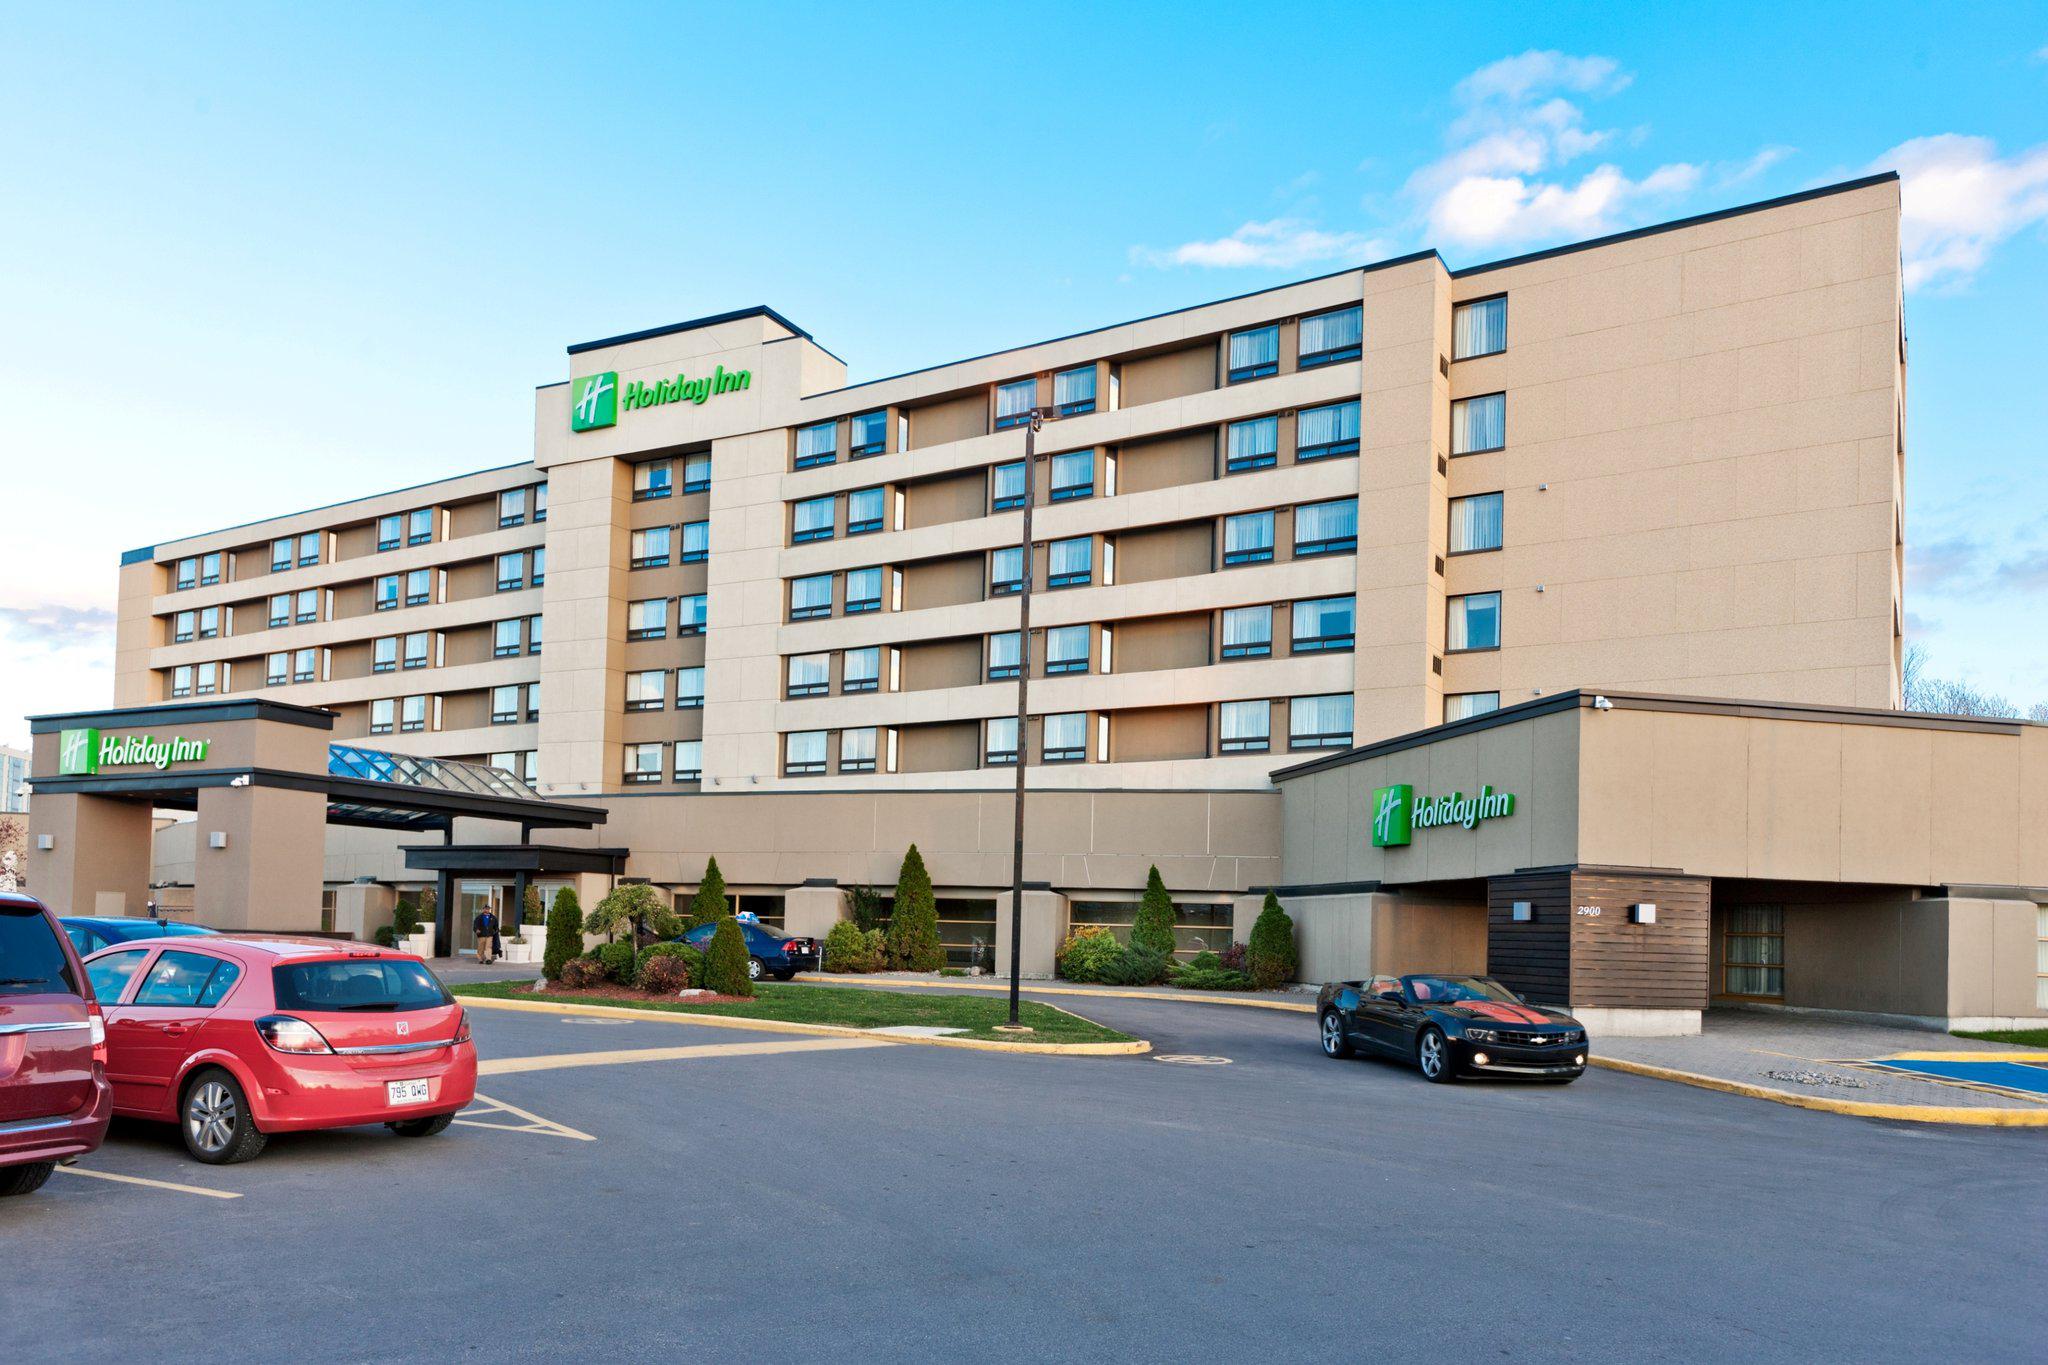 Holiday Inn Laval - Montreal, an IHG Hotel Laval (450)682-9000